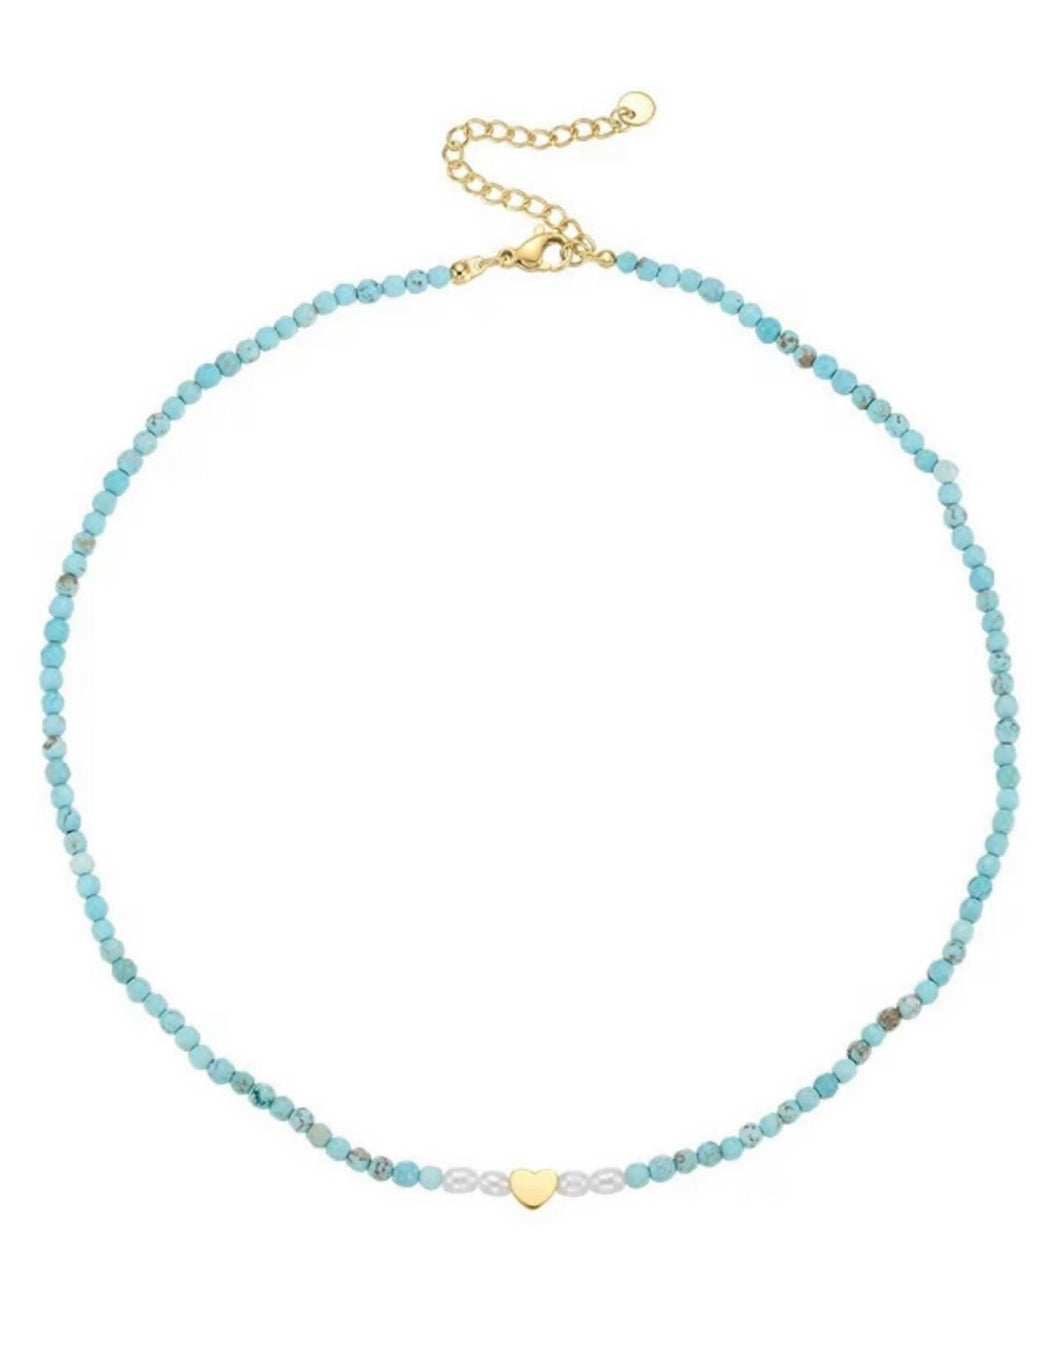 Hearty Necklace in Turquoise